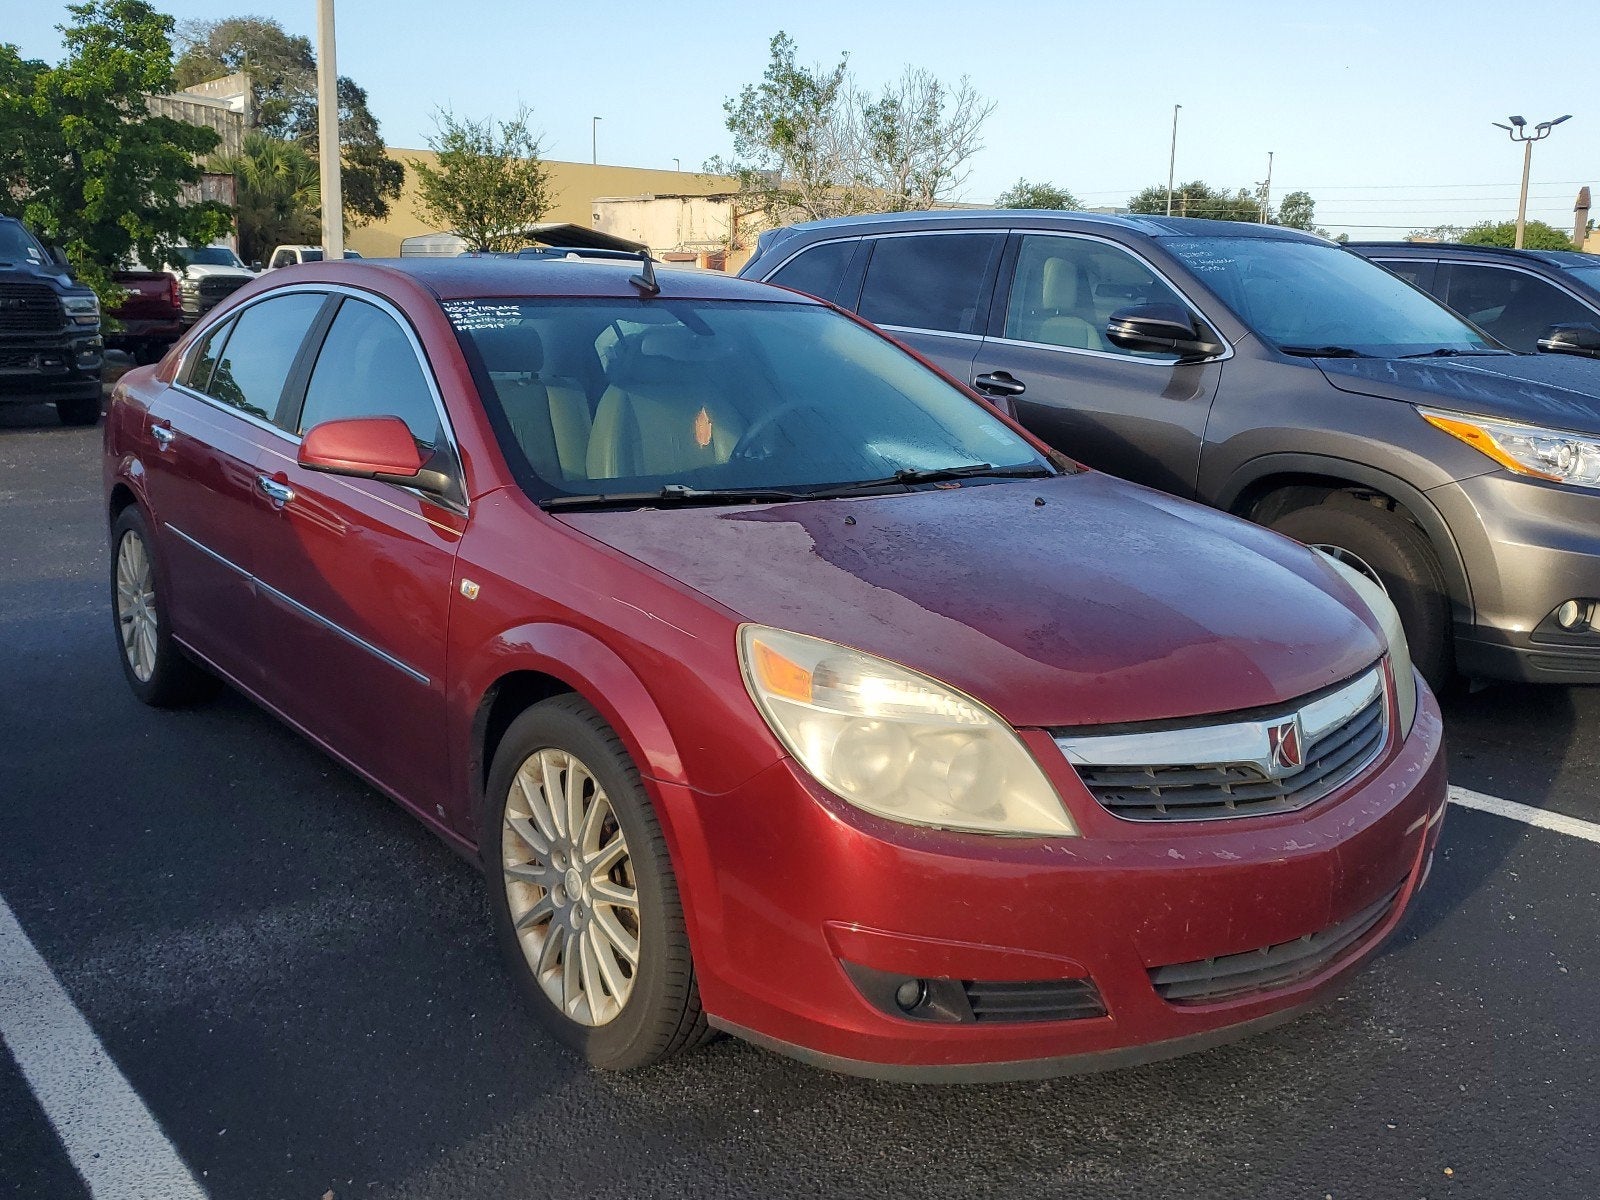 Used 2008 Saturn Aura XR with VIN 1G8ZV57728F250917 for sale in Lumberton, NC